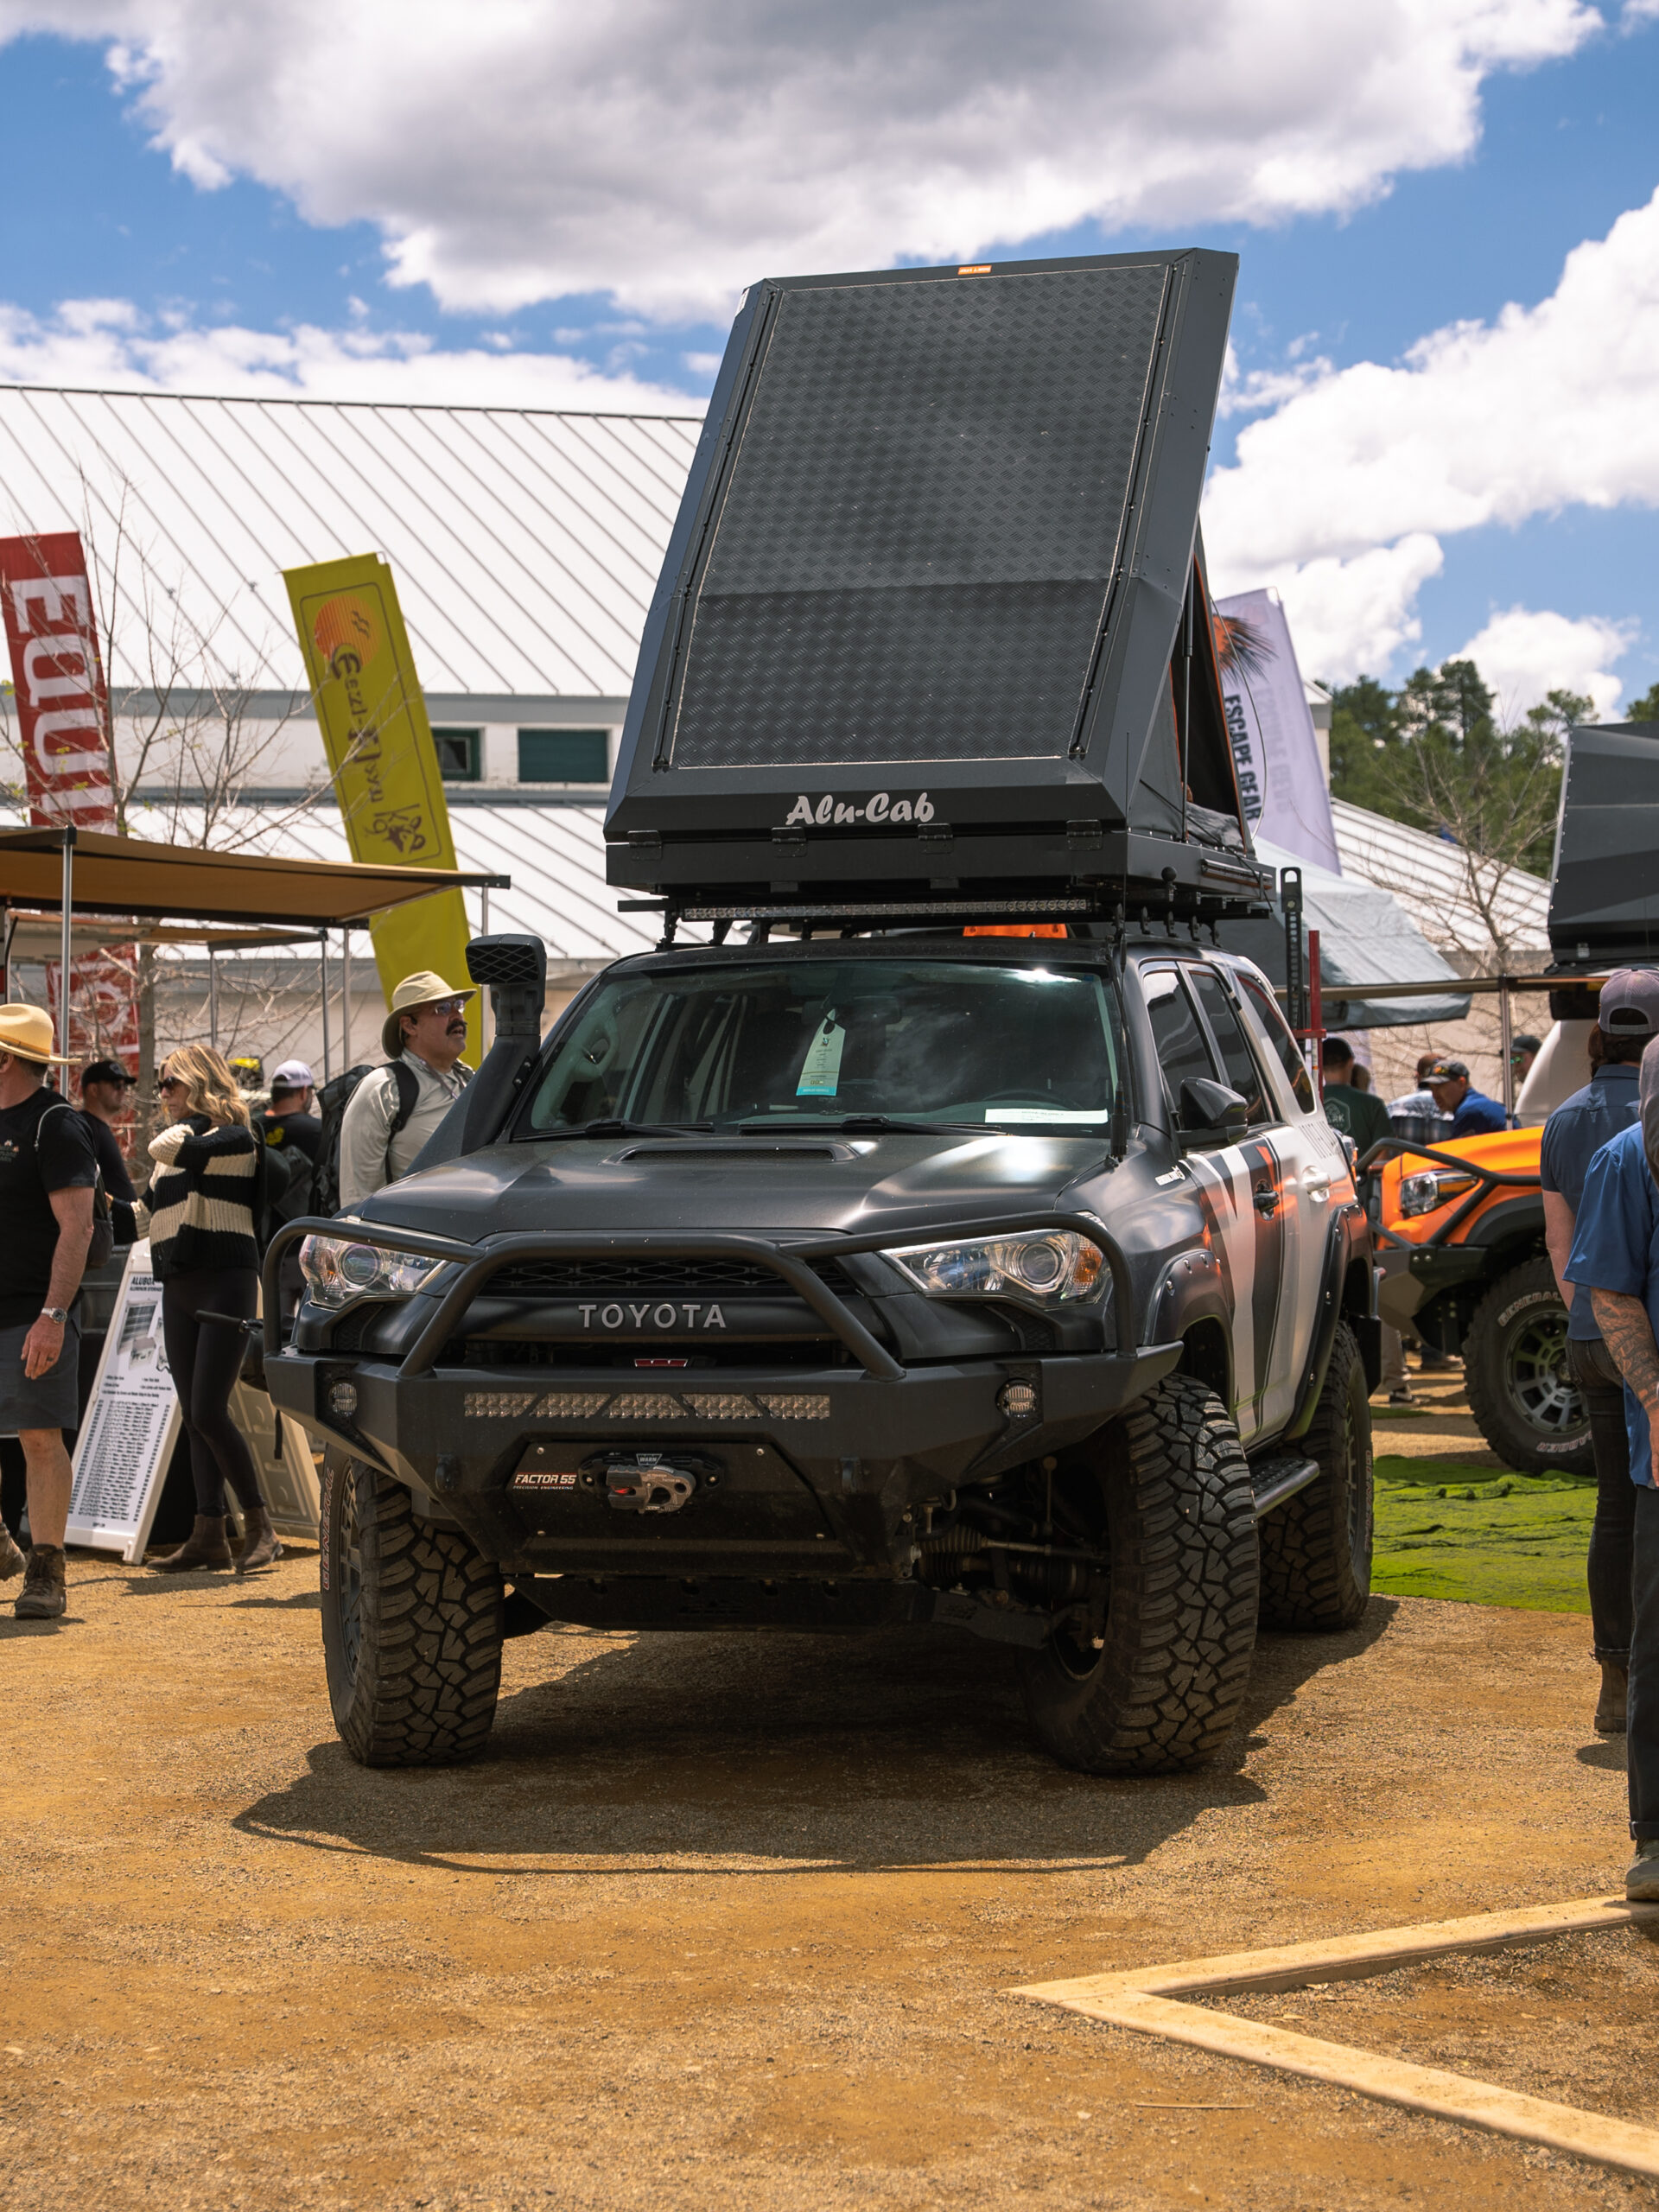 A black Tacoma with Alu-Cab pop-up tent at Overland Expo West.